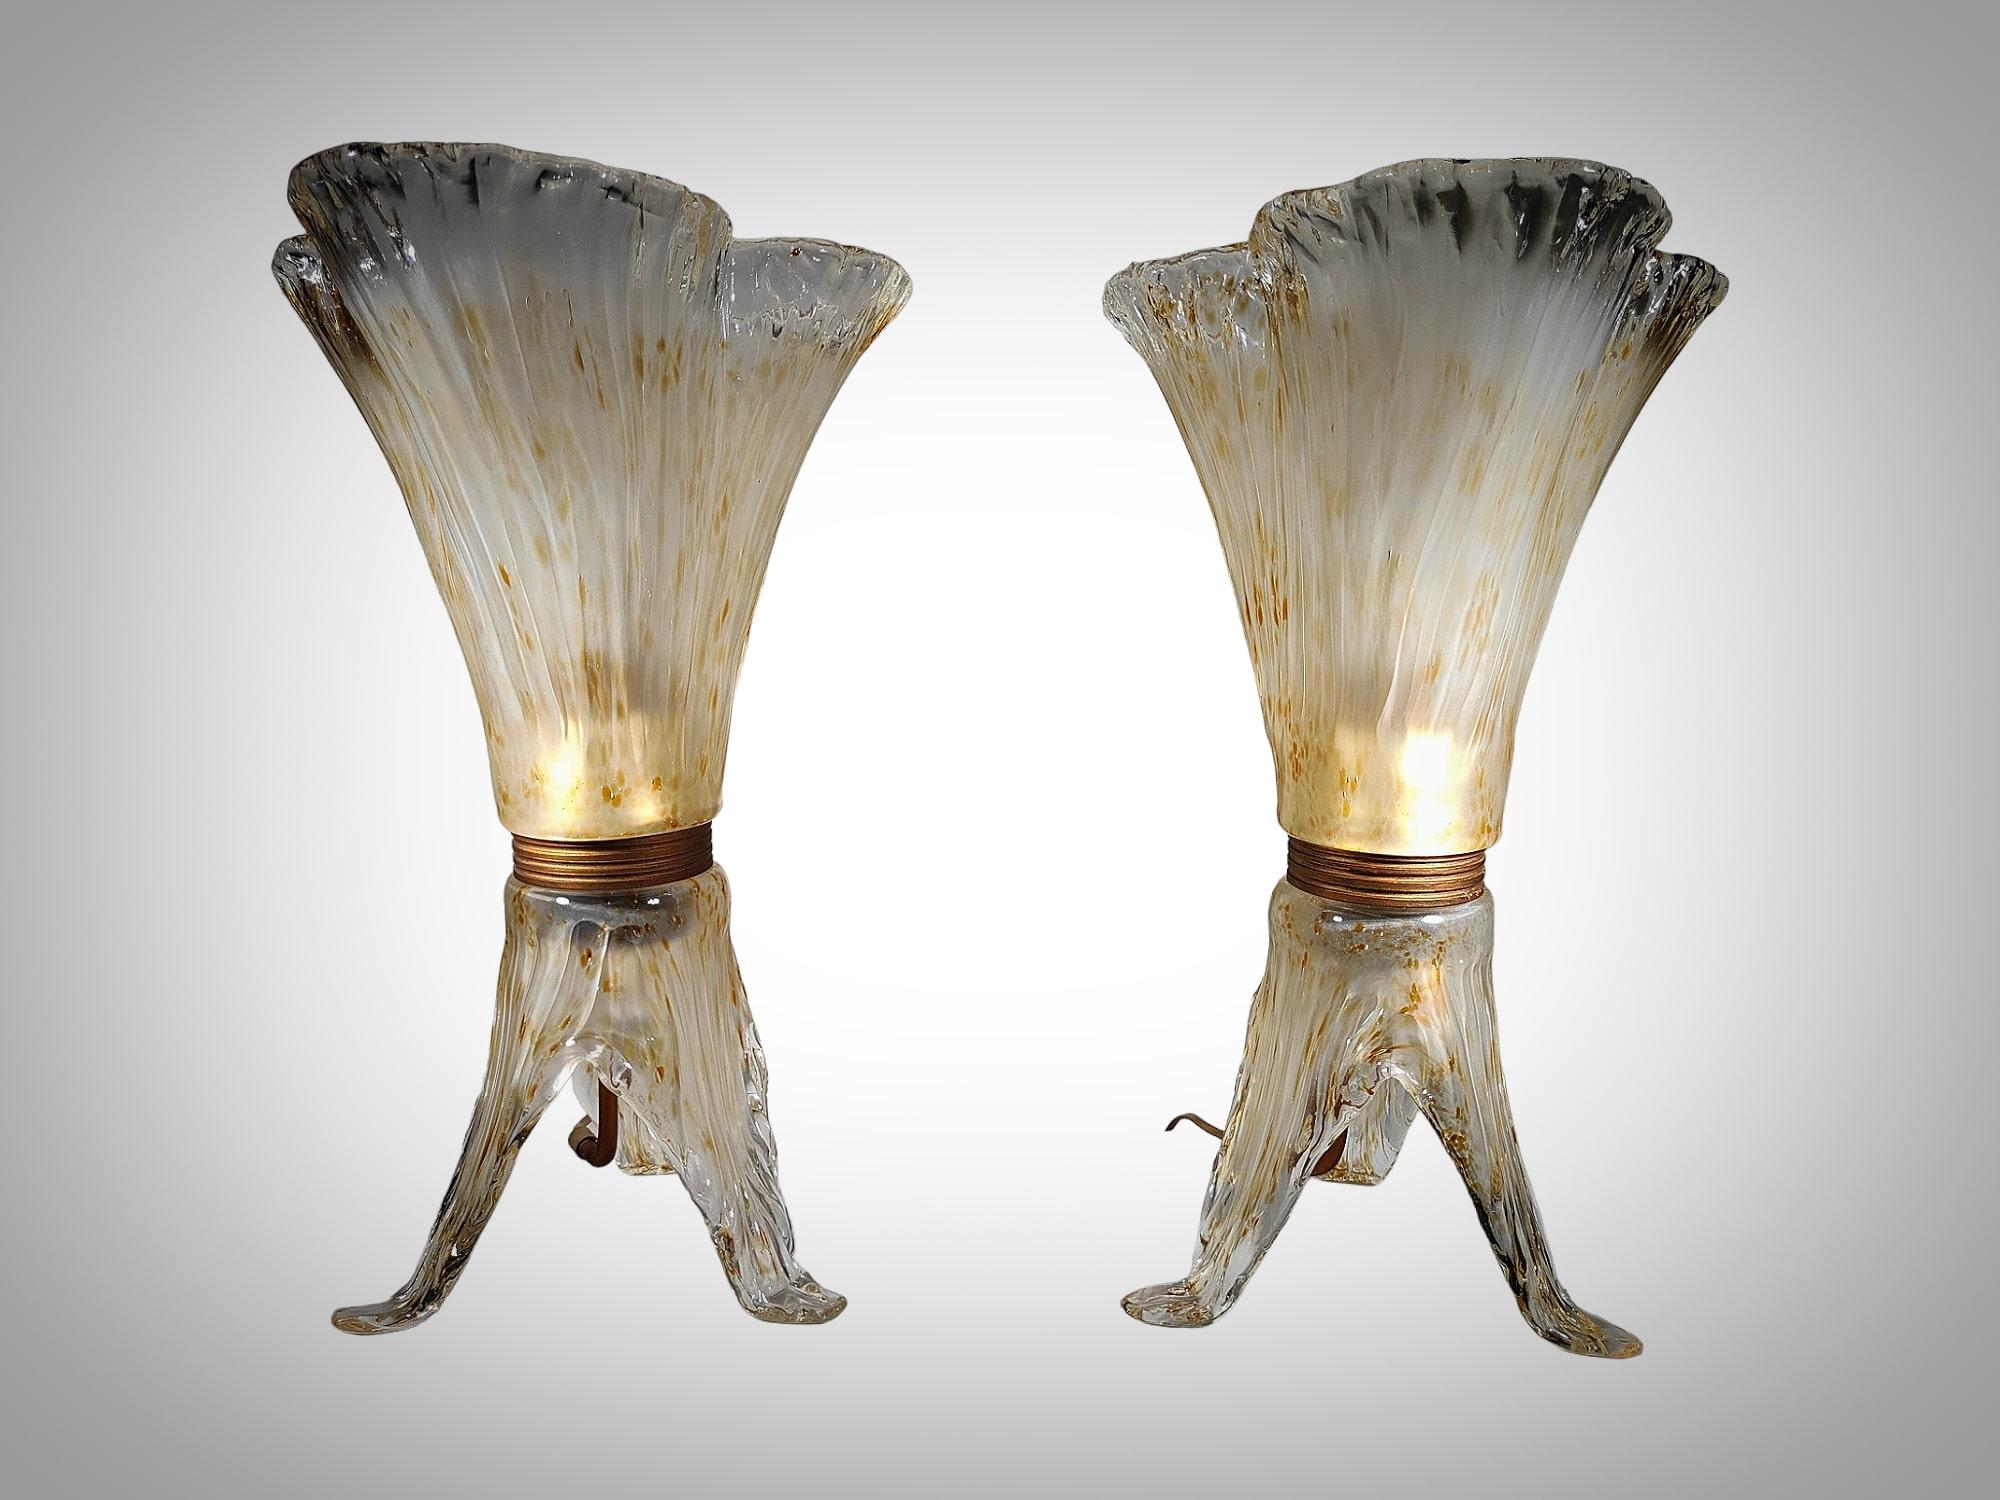 Elegant Pair of Murano Glass Table Lamps - 1970s For Sale 10